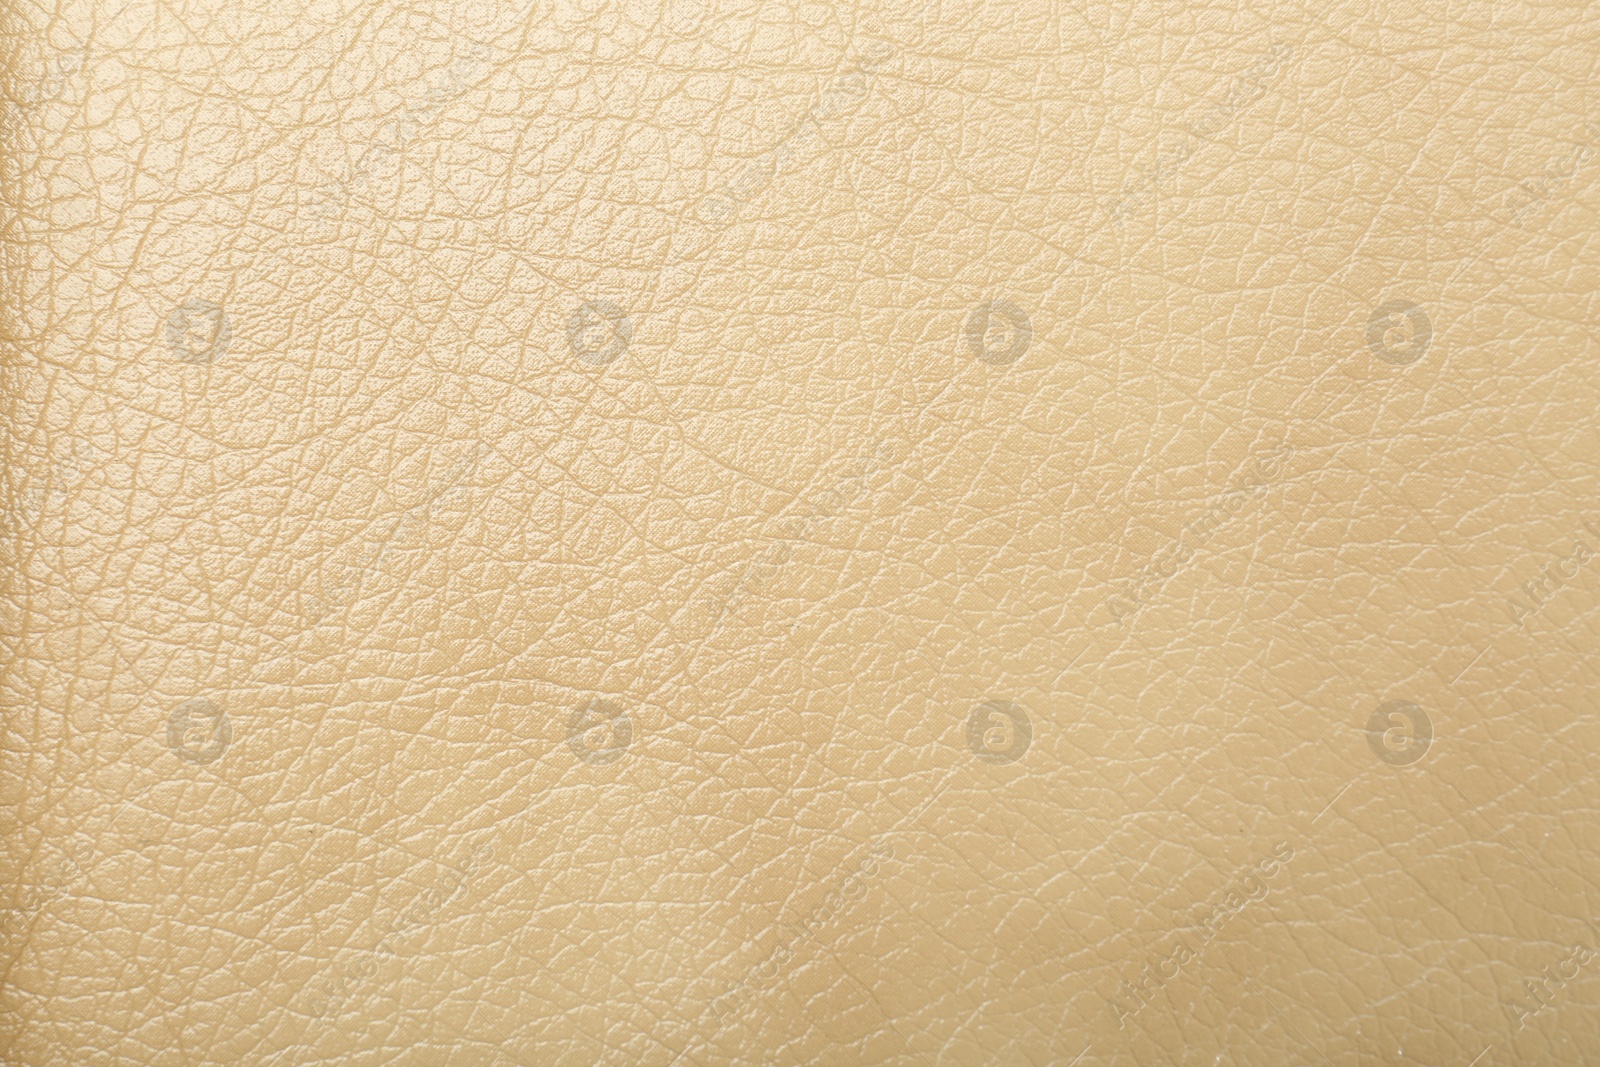 Photo of Texture of beige leather as background, closeup